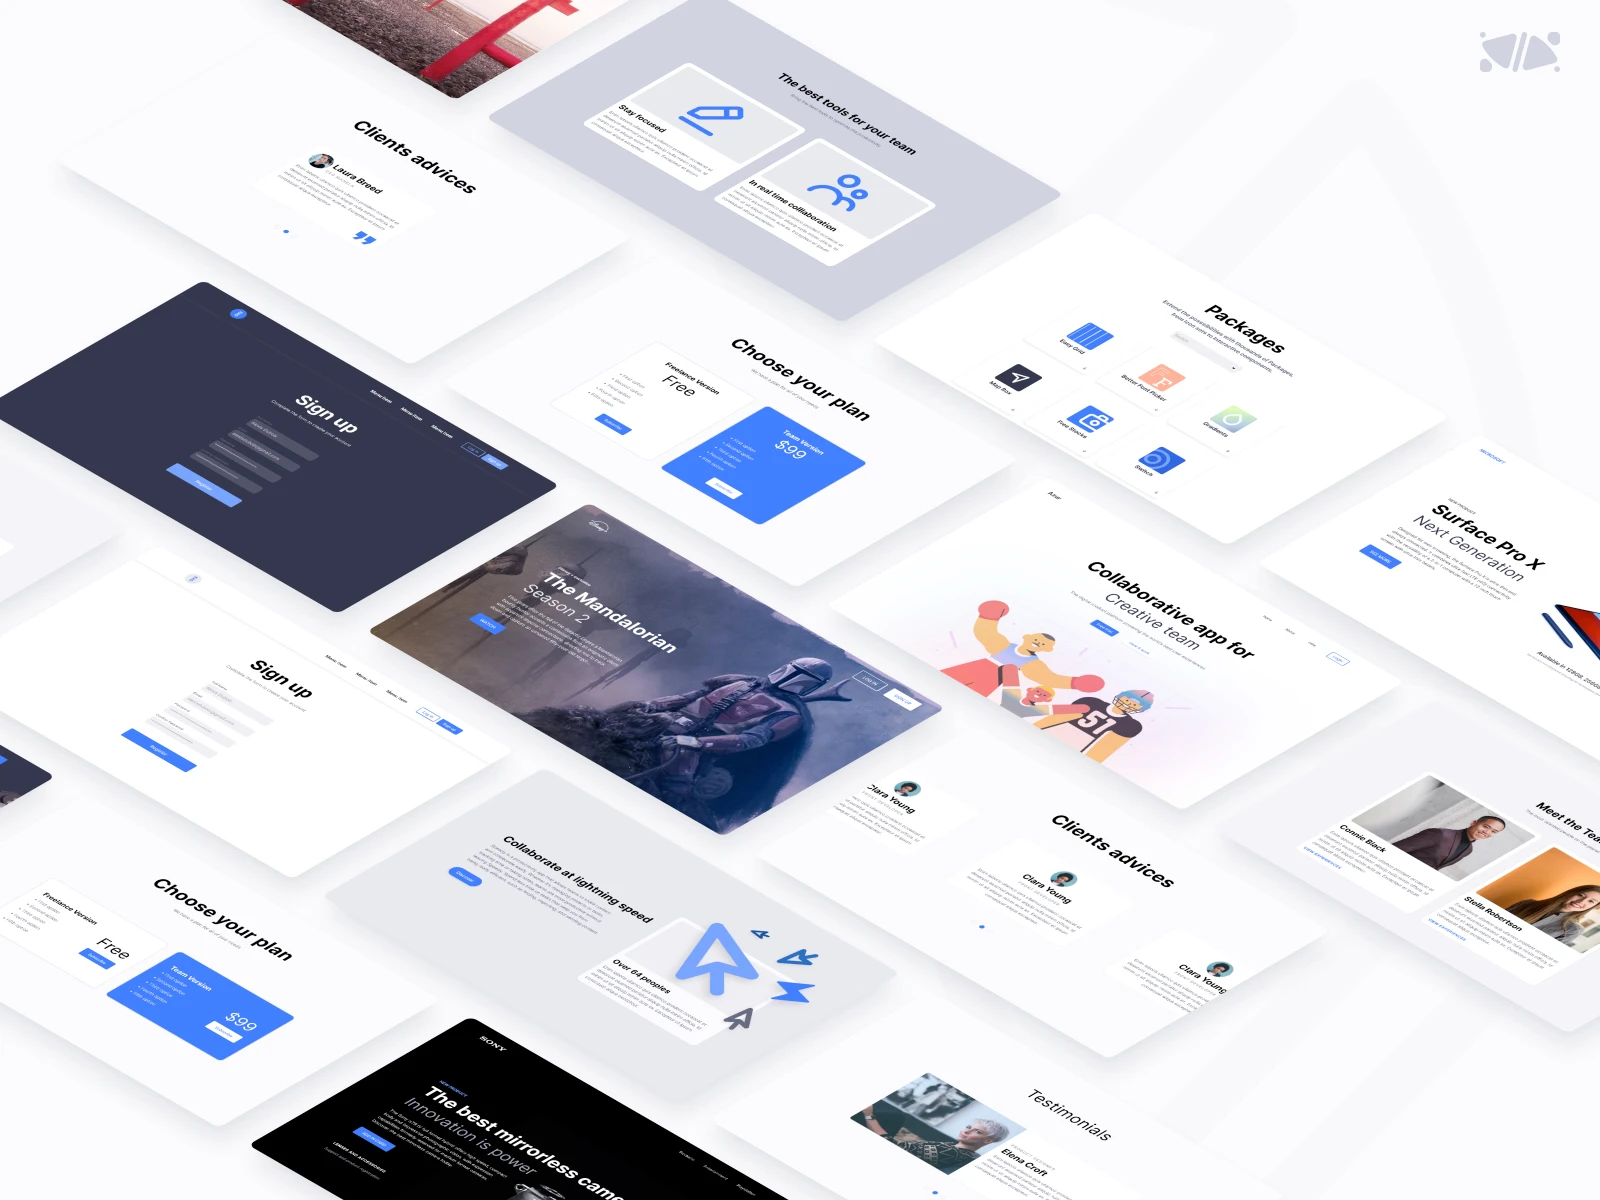 EXO KIT Design System for Figma - EXO KIT is a huge library: typography, colors, buttons, cards, fields... It meets all your needs to create your design system! This UI kit is free for personal project and it works with Figma.